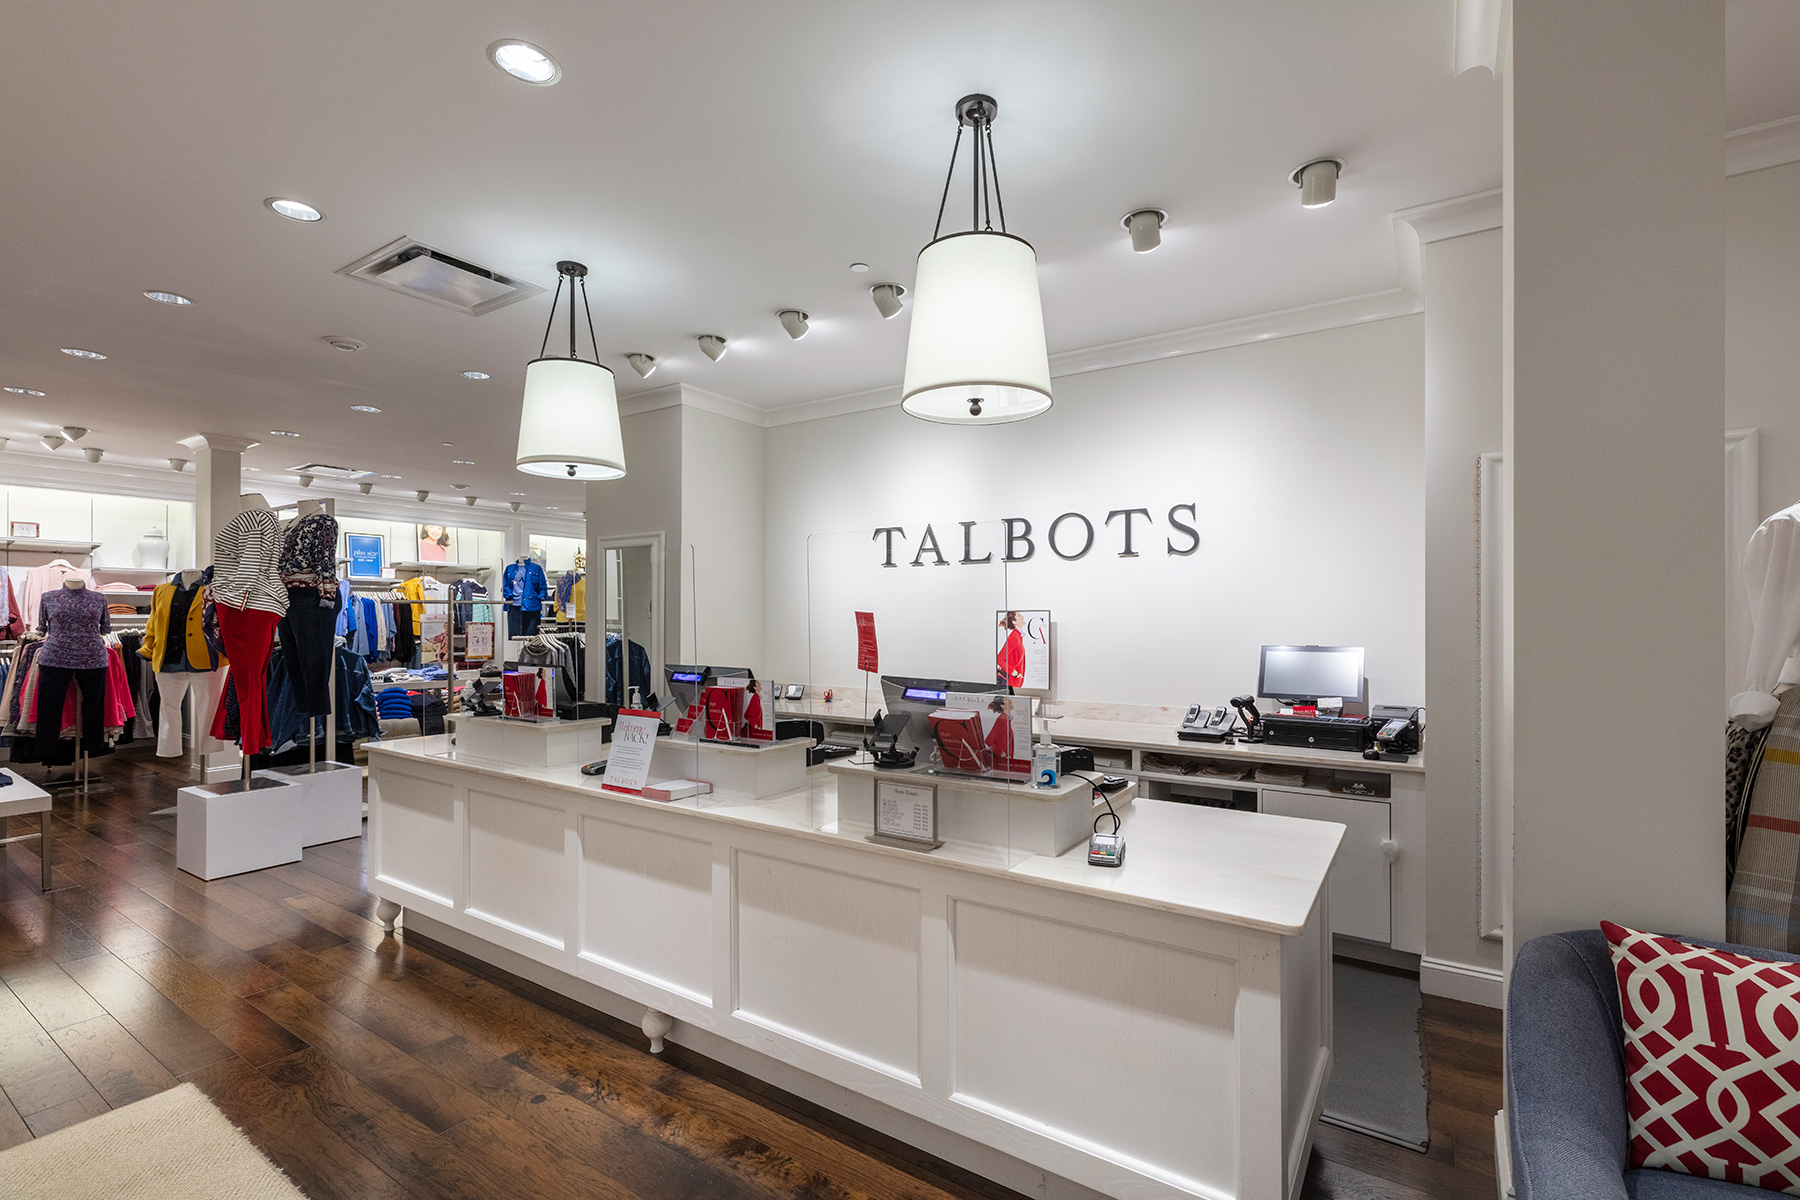 Inside of Talbots store, counter